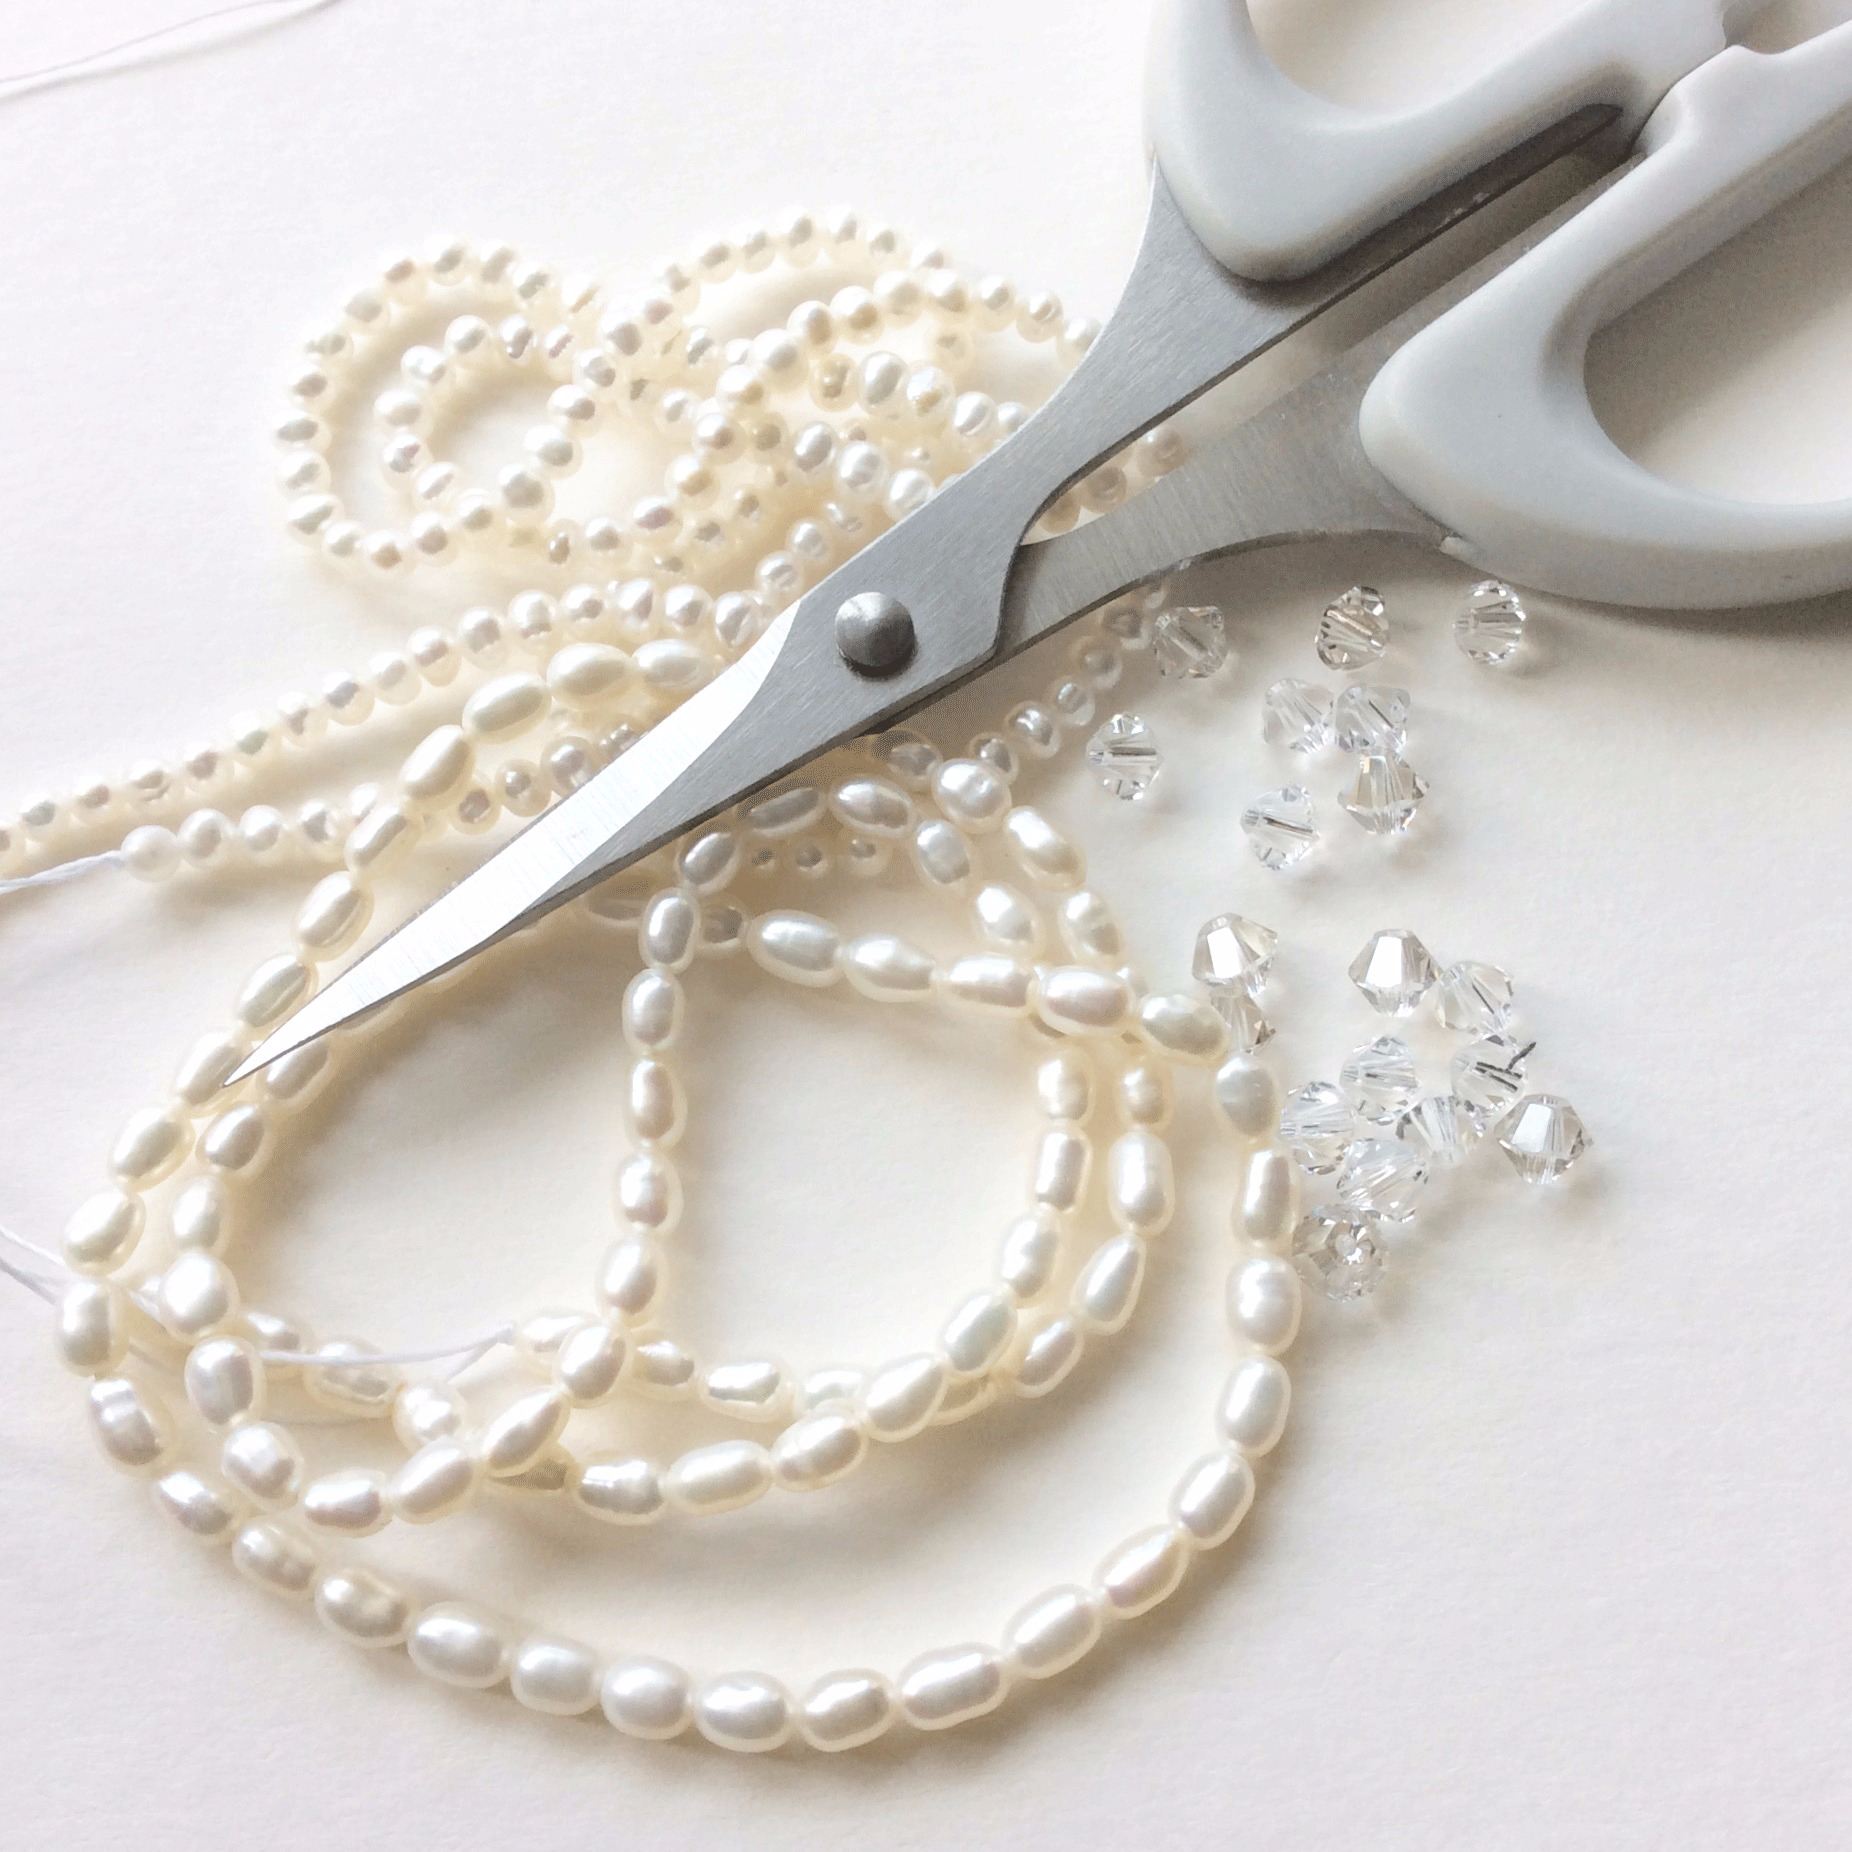 Pearls and Crystals Bridal Accessories